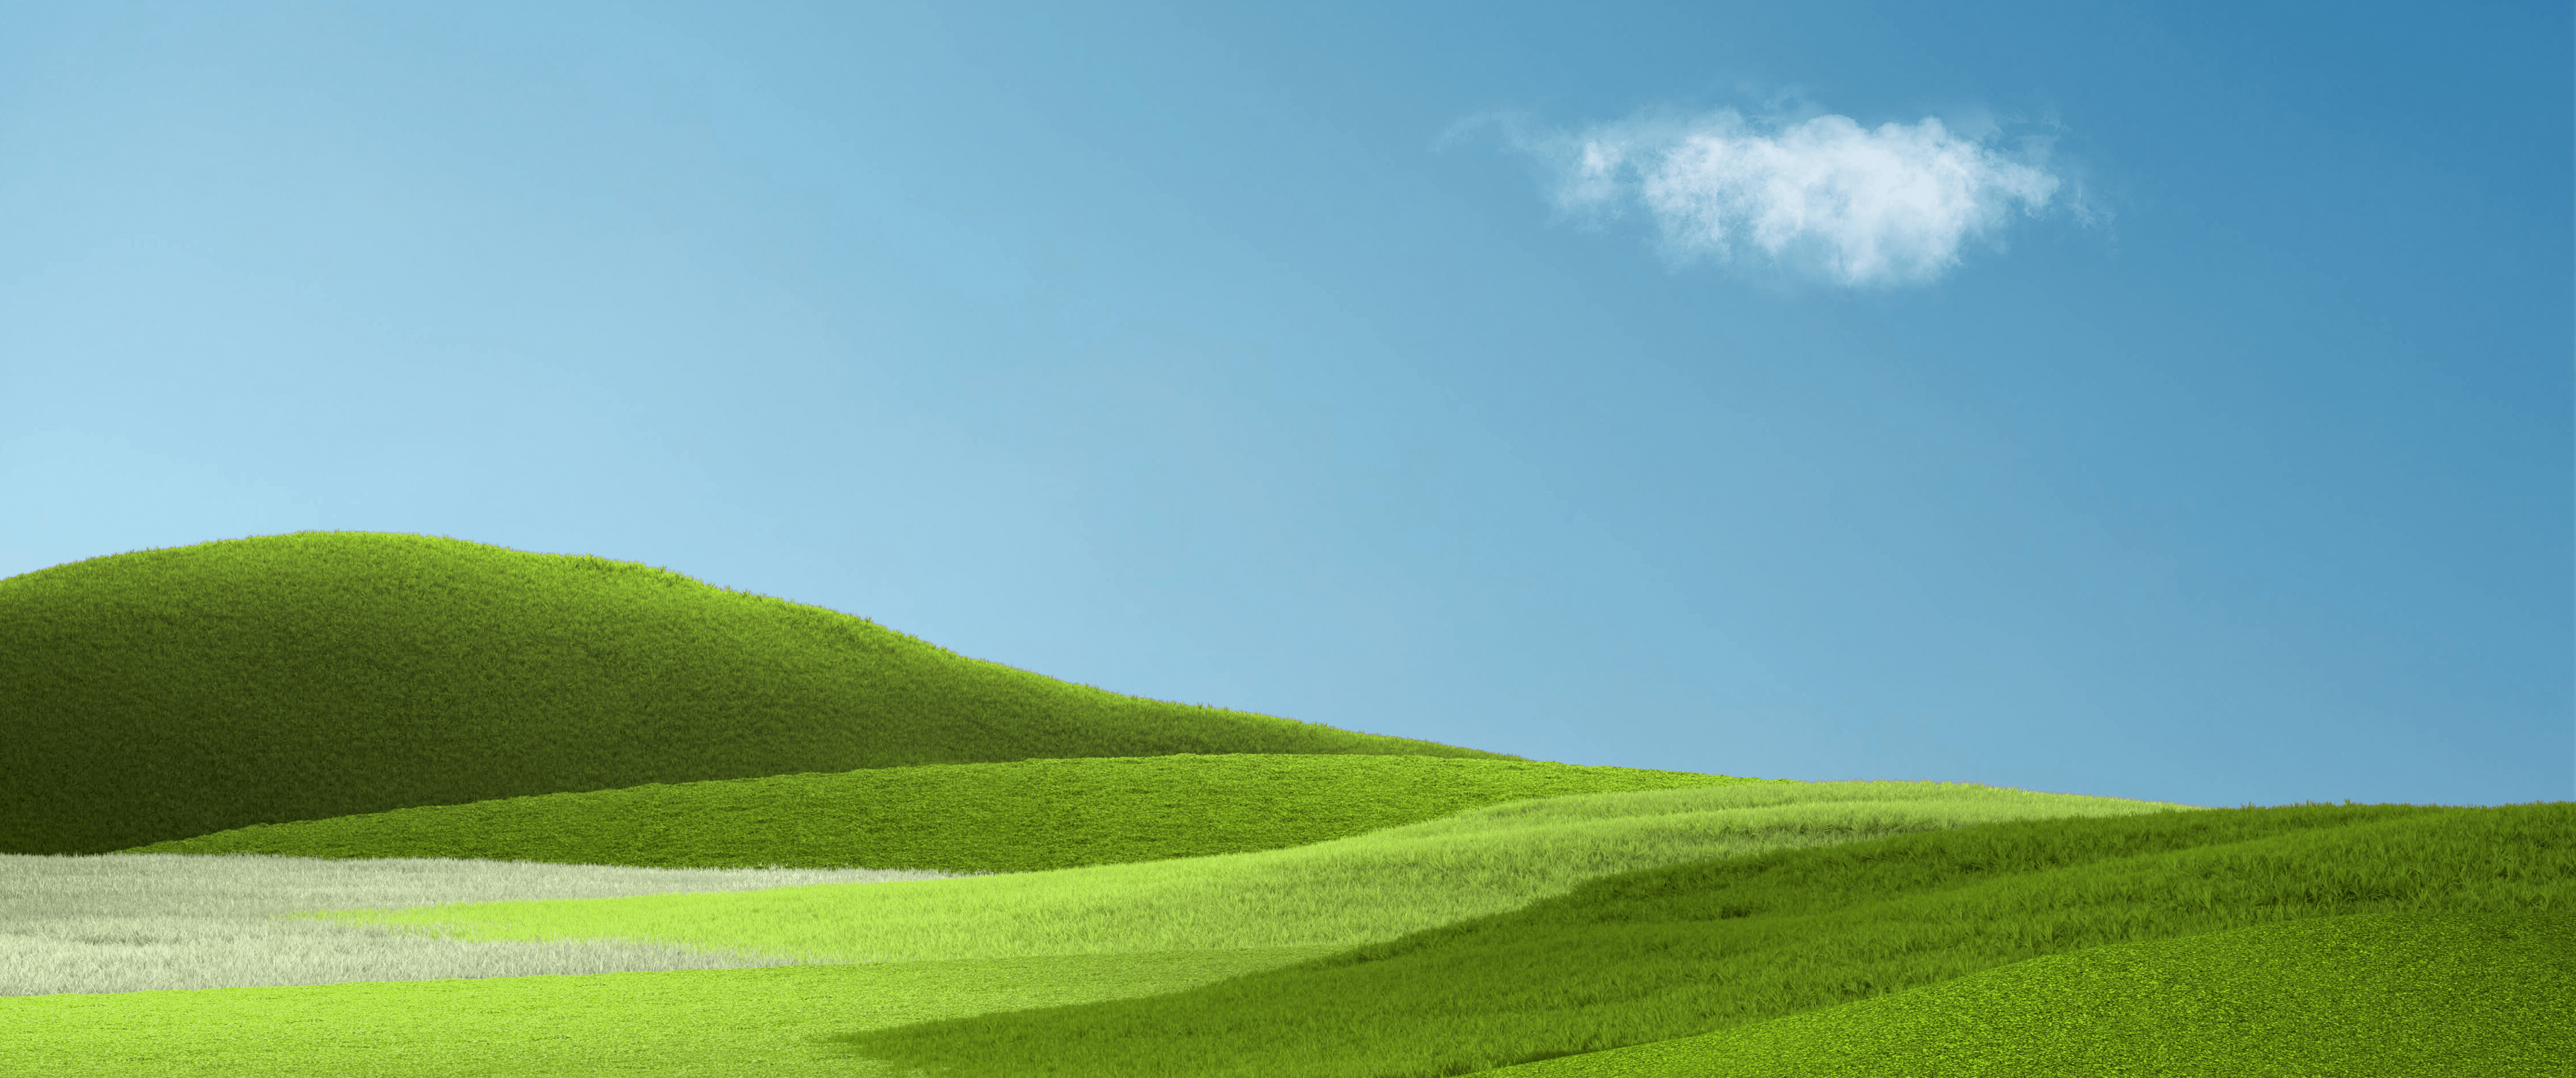 Grass and Sky: Aesthetic landscape, Green field, Clear air, Nature, Wilds, Skyline. 3440x1440 Dual Screen Wallpaper.